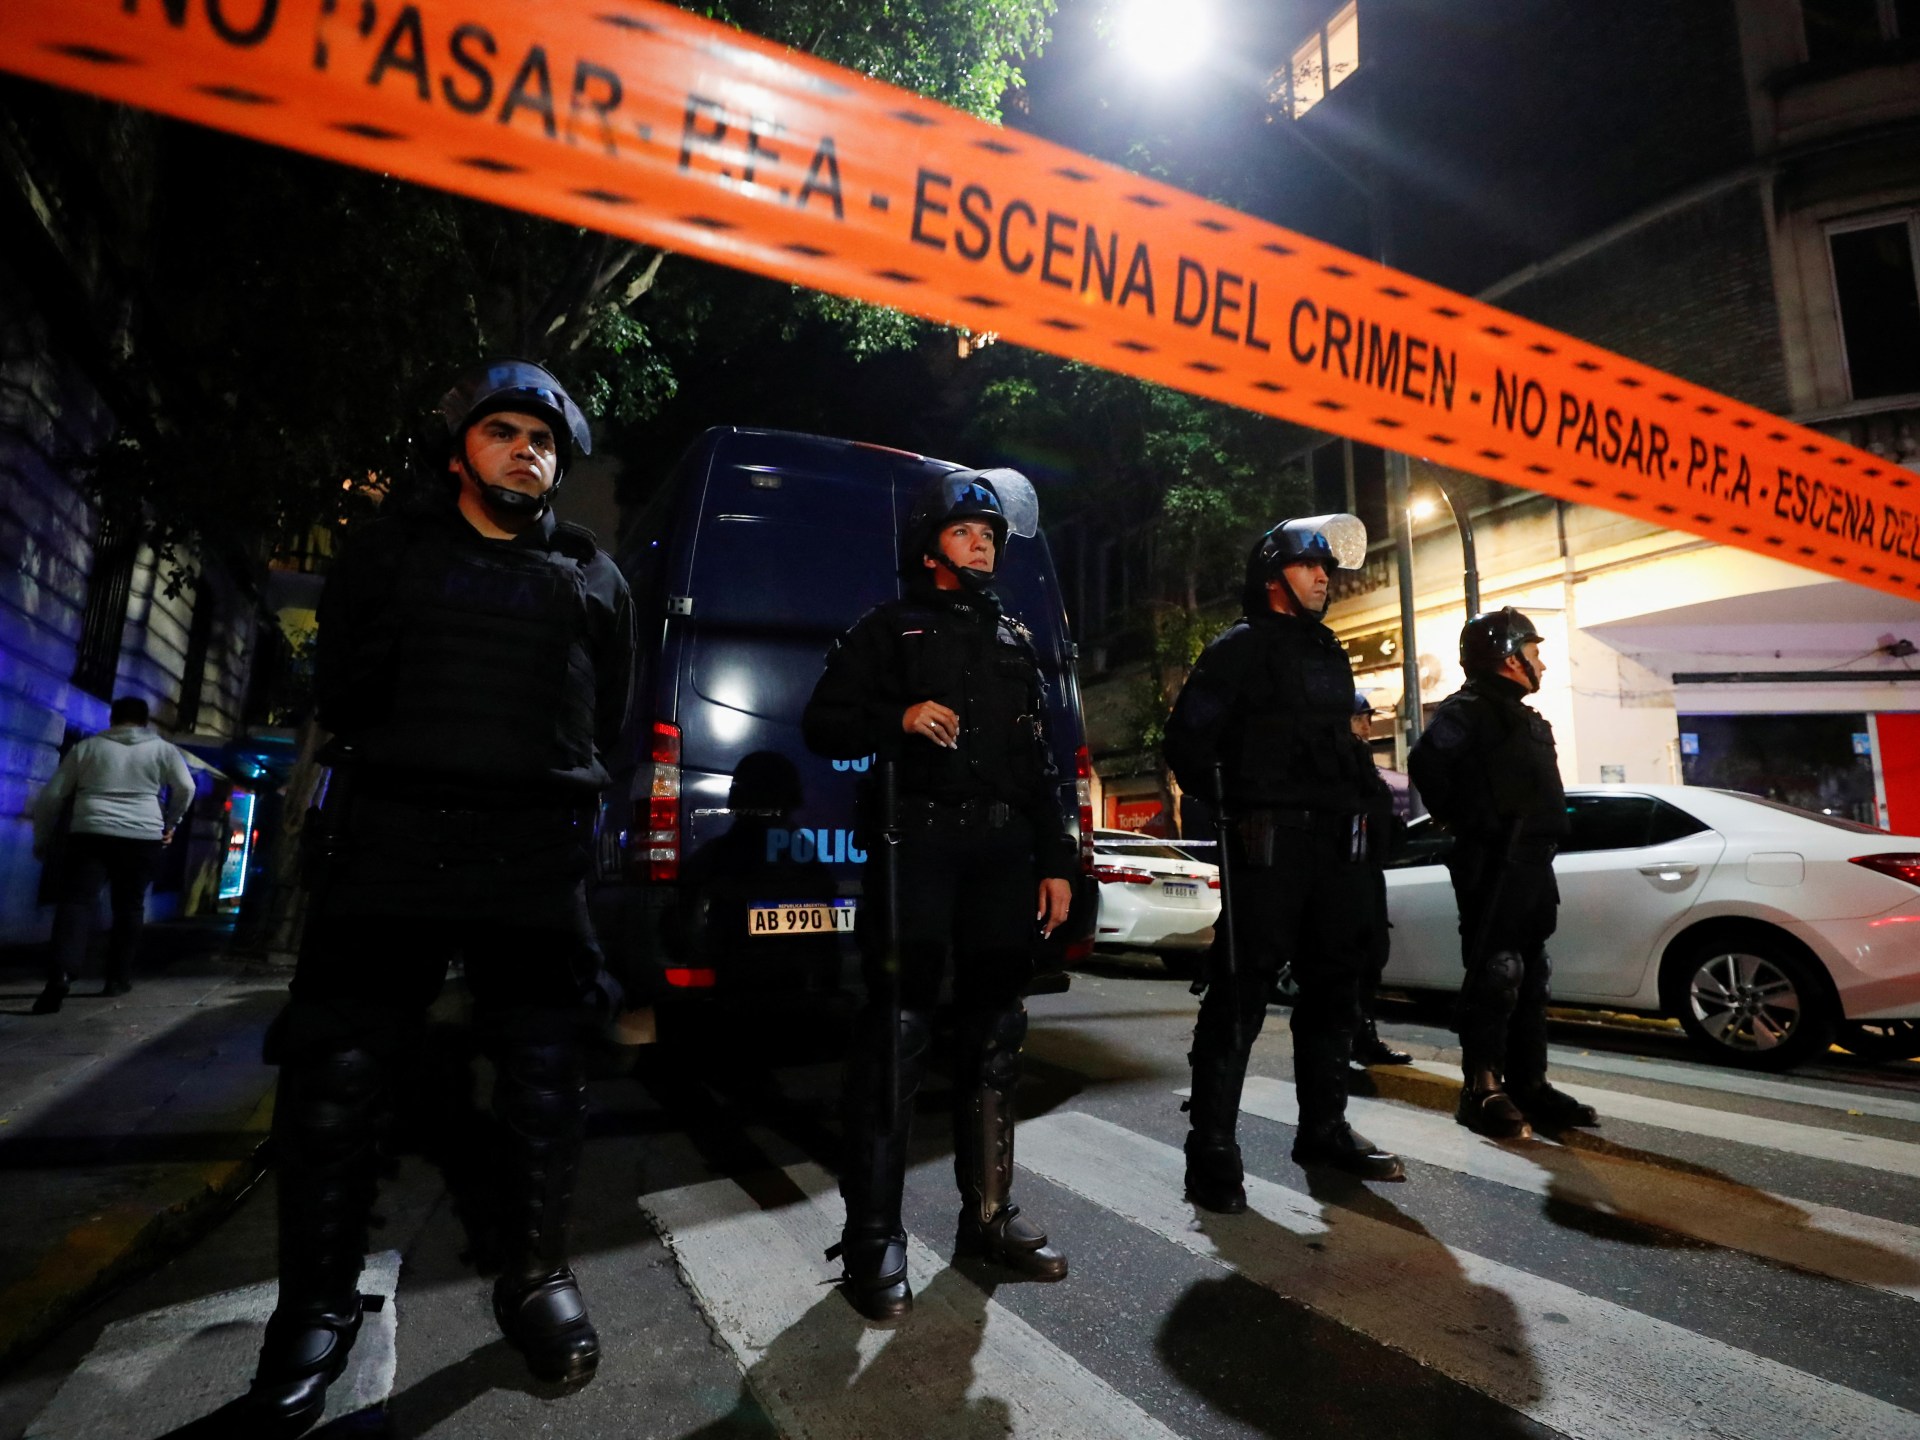 Man arrested for pointing gun at head of Argentina’s Kirchner